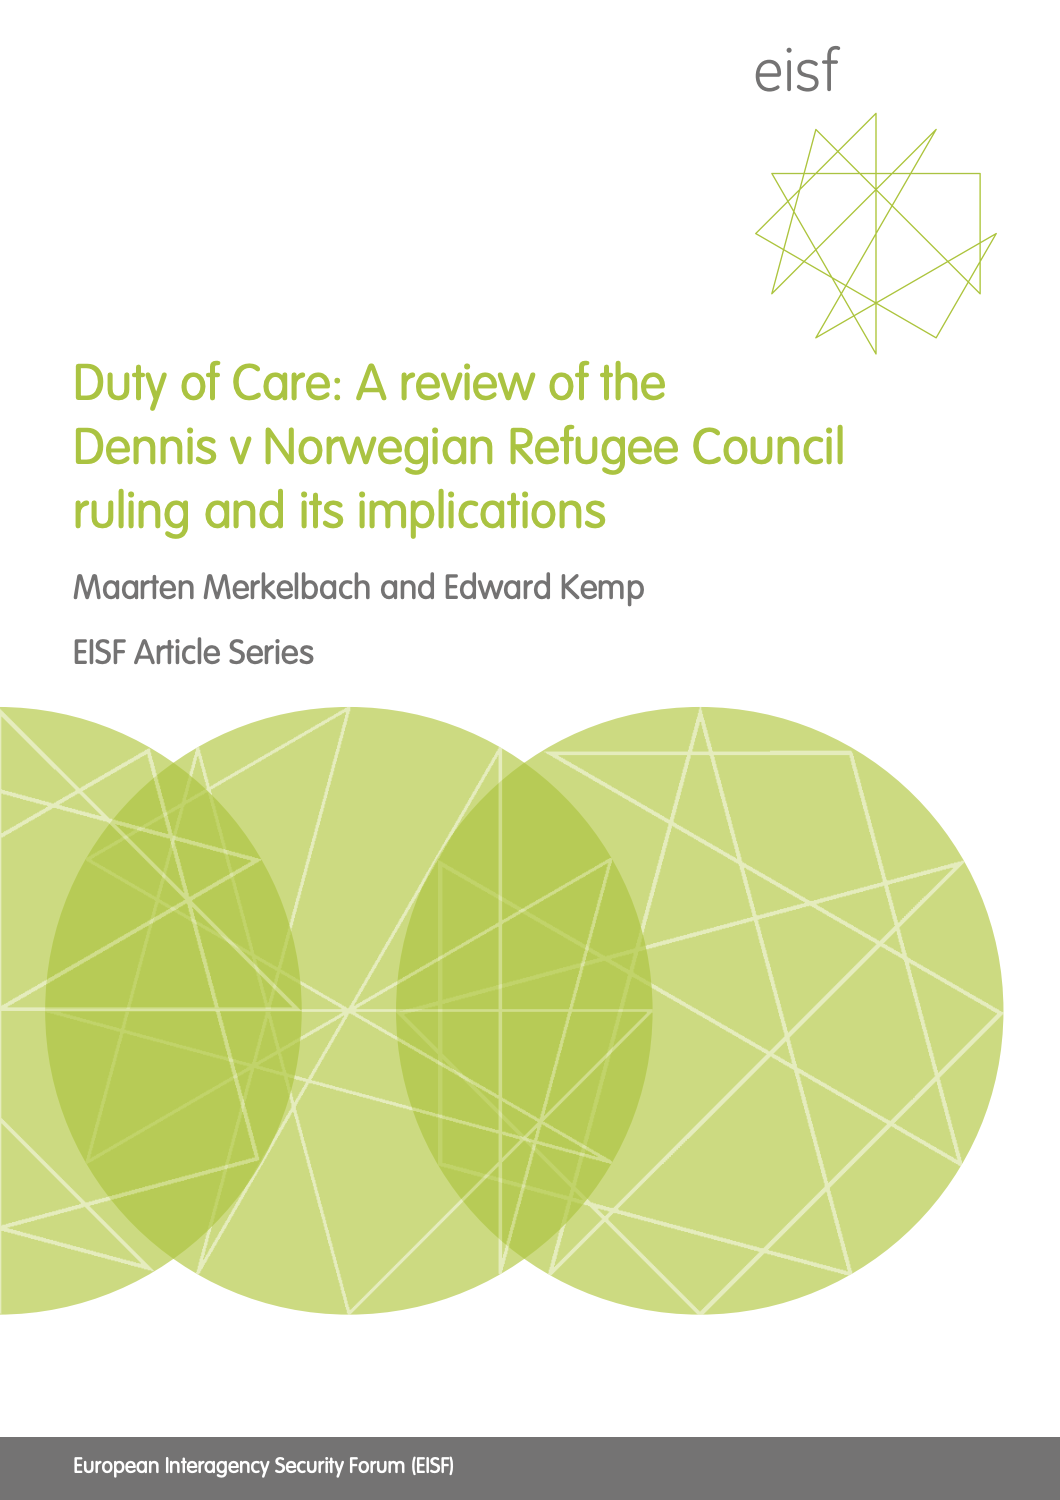 Duty of Care: A review of the Dennis v Norwegian Refugee Council ruling and its implications